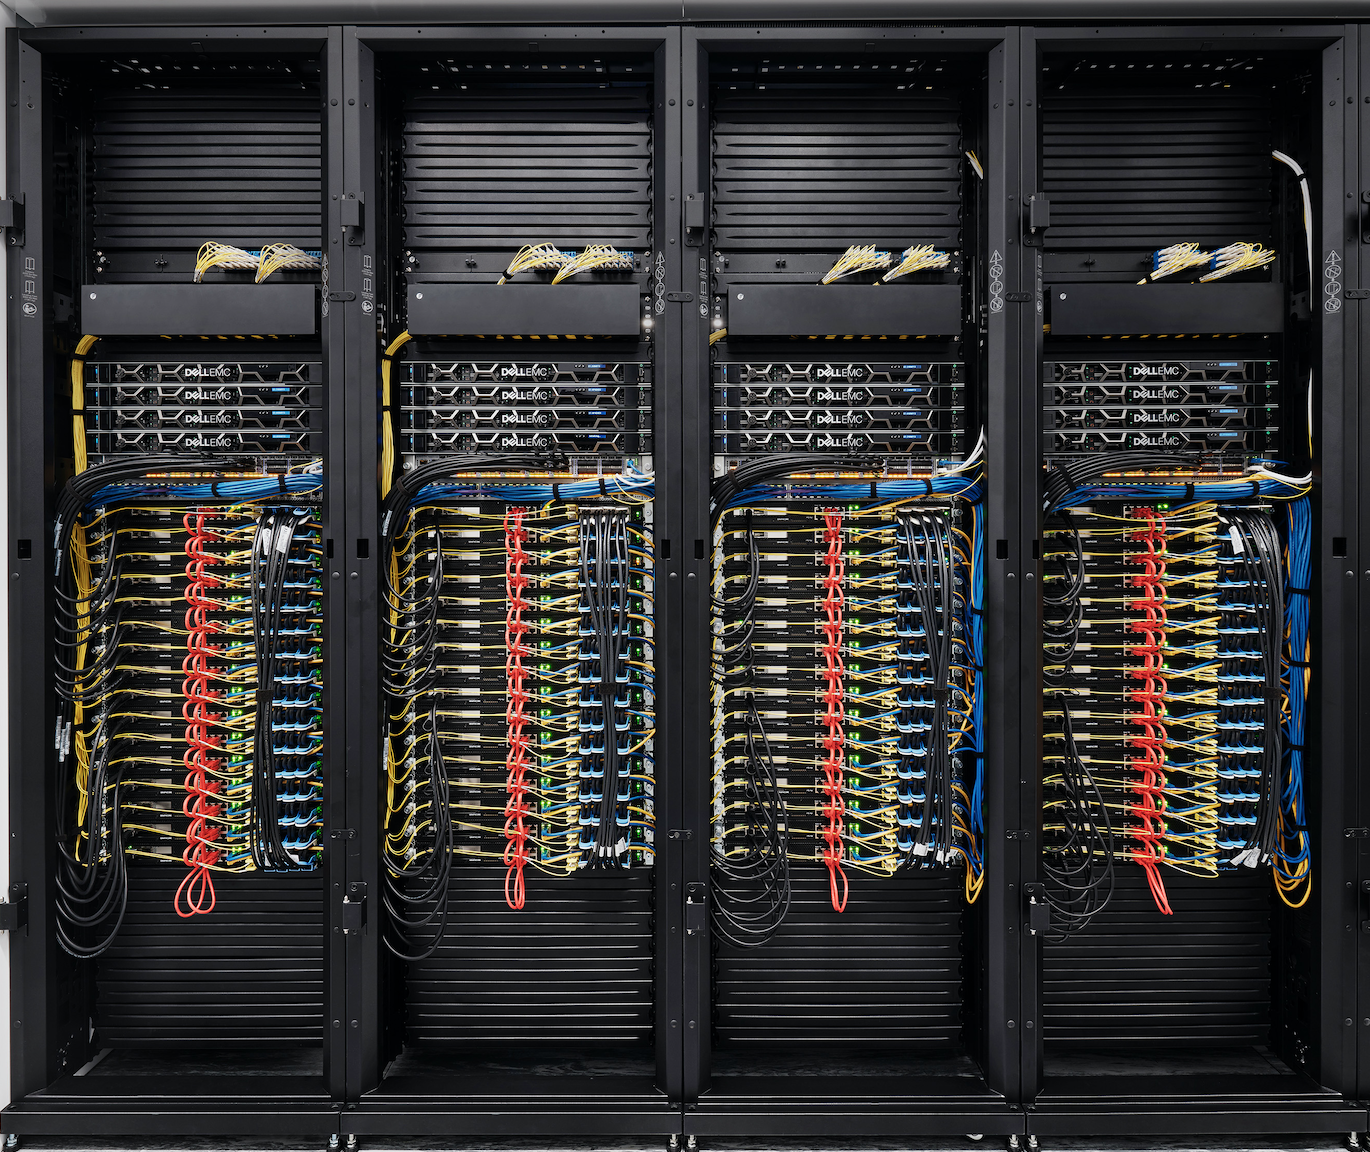 _images/bow256-datacentre.png